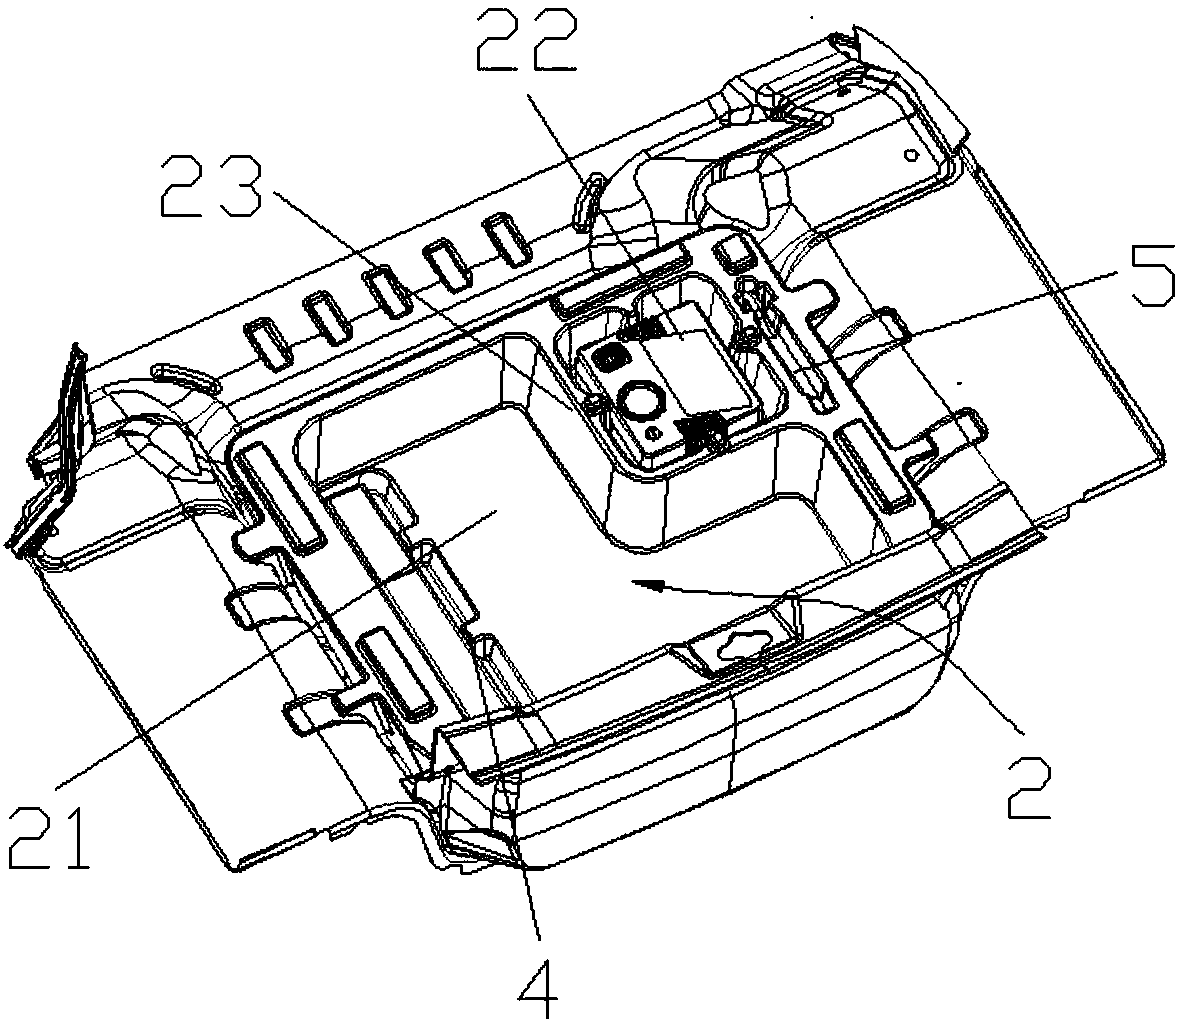 Car trunk structure and car